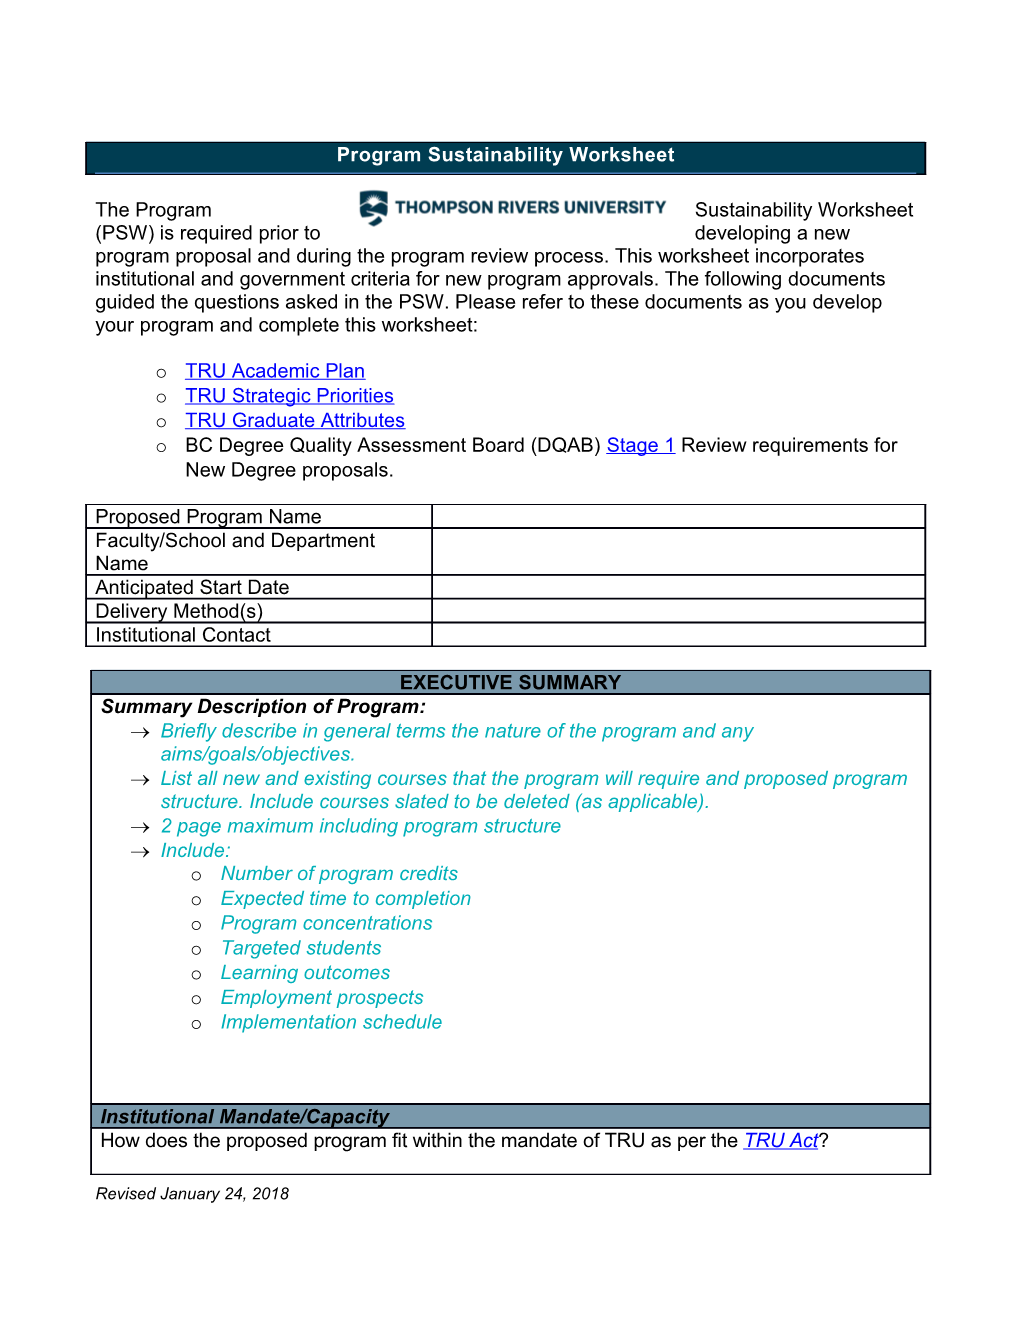 The Program Sustainability Worksheet (PSW) Is Required Prior to Developing a New Program